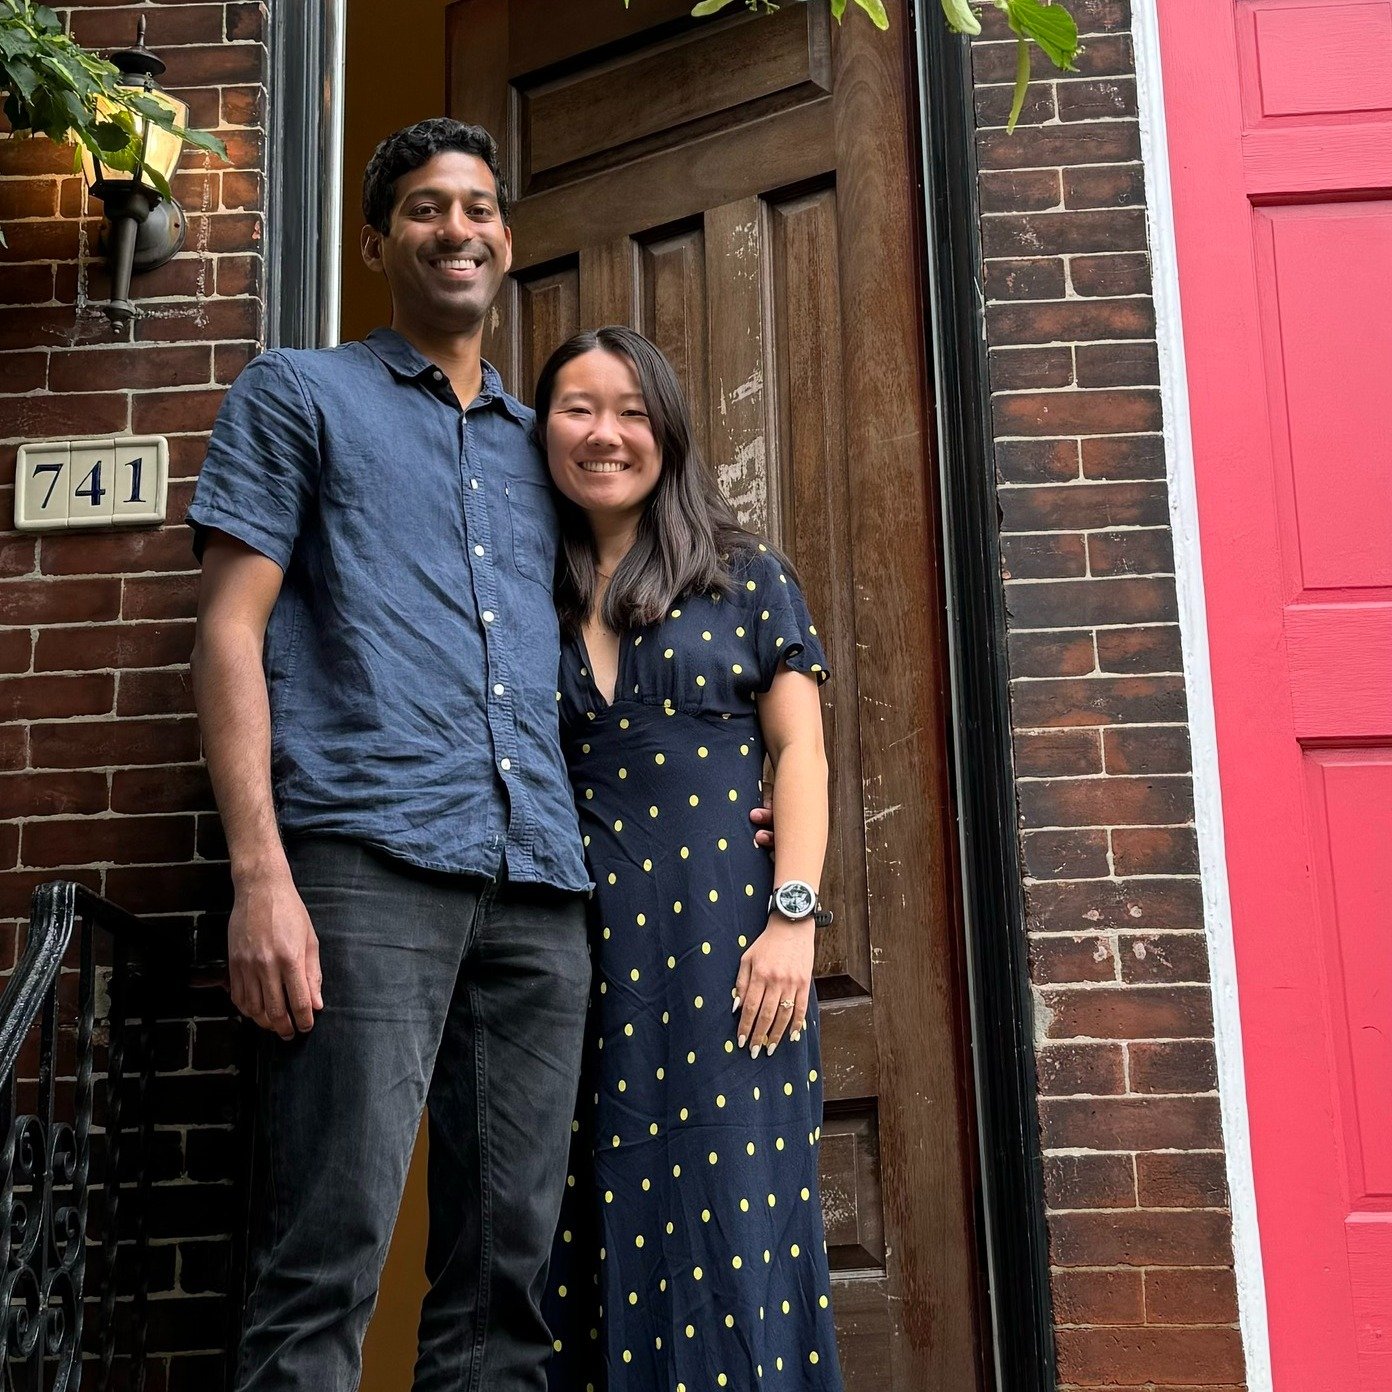 Raj and Miki were living in Brooklyn for the past 10 years and were considering buying their first home in Philadelphia. They reached out to PHG looking to meet an agent who could guide them on all the ins and outs of each neighborhood and what they 